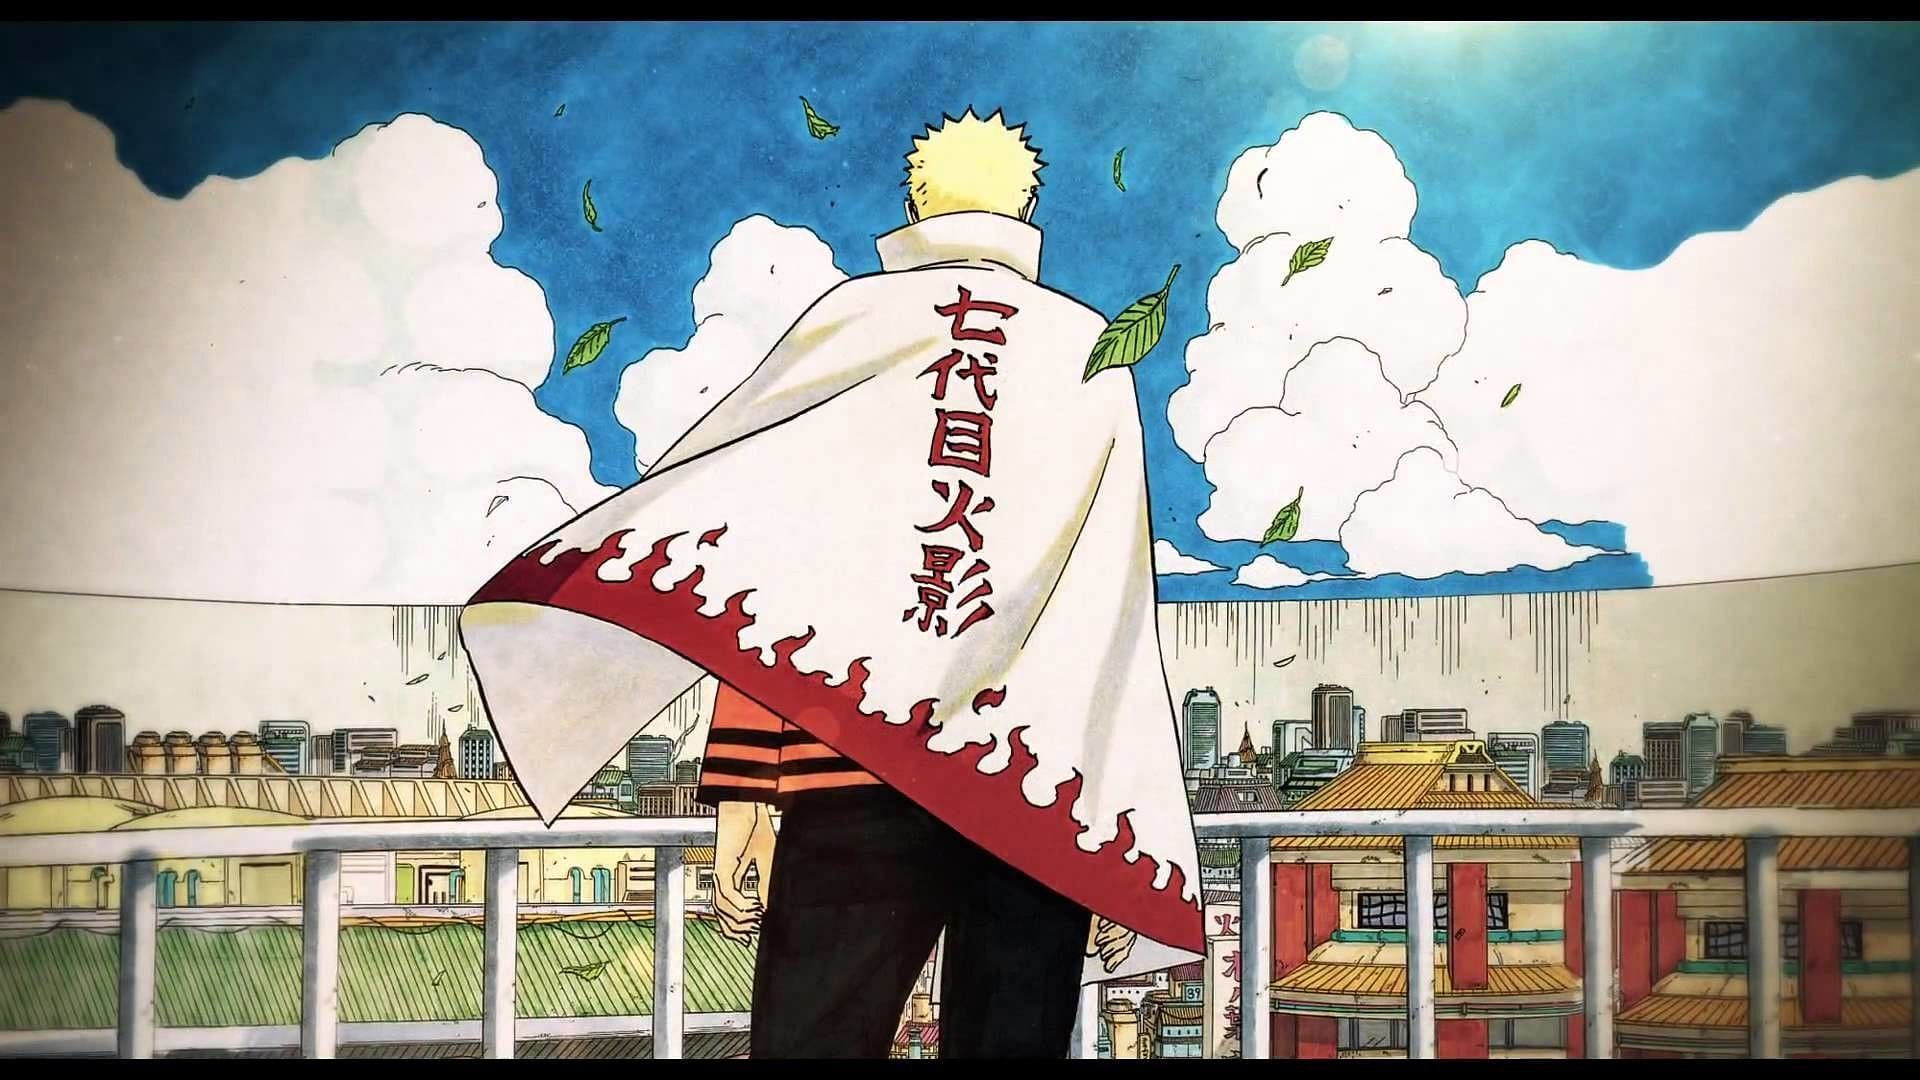 5 characters who always believed that Naruto will be the Hokage